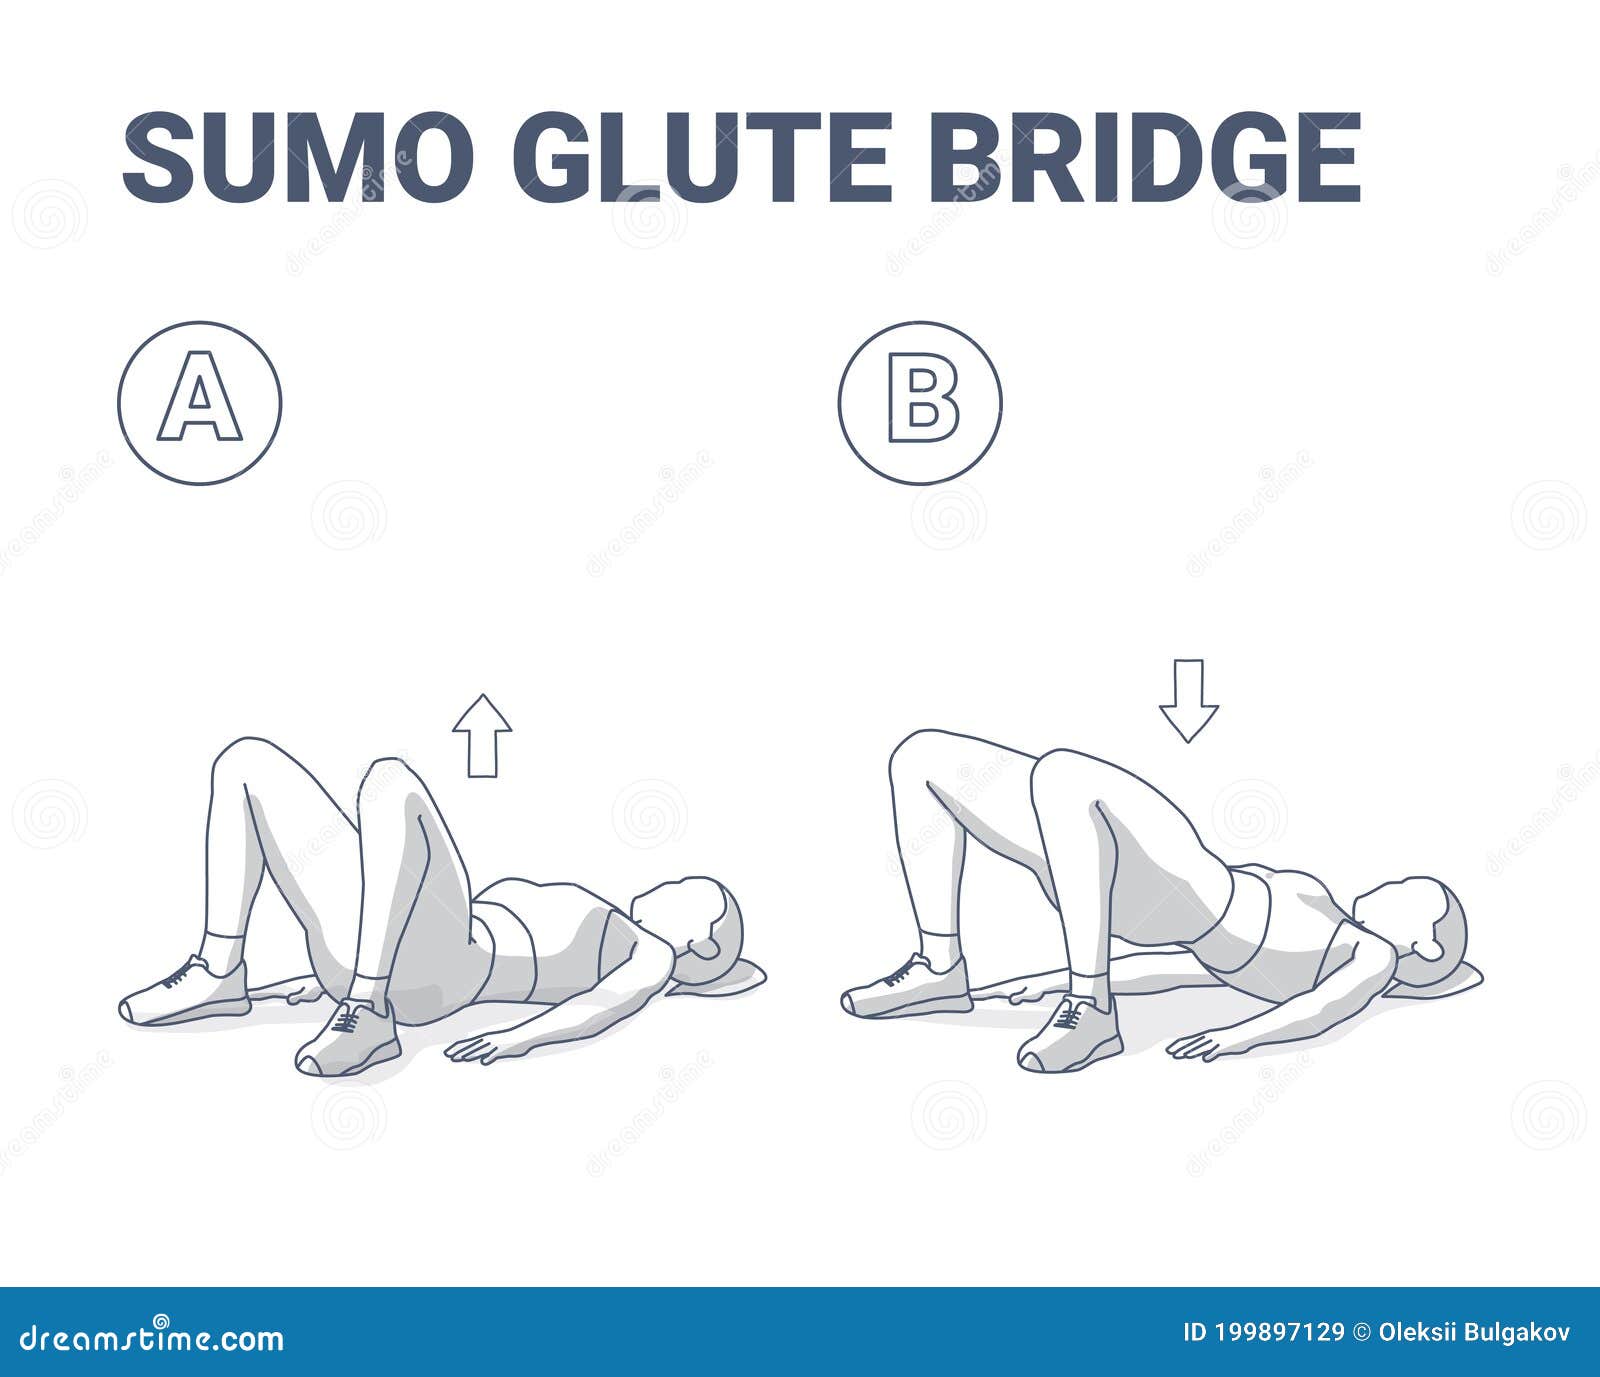 Sumo Glute Bridge Girl Workout Exercise Guide Black And White Concept ...